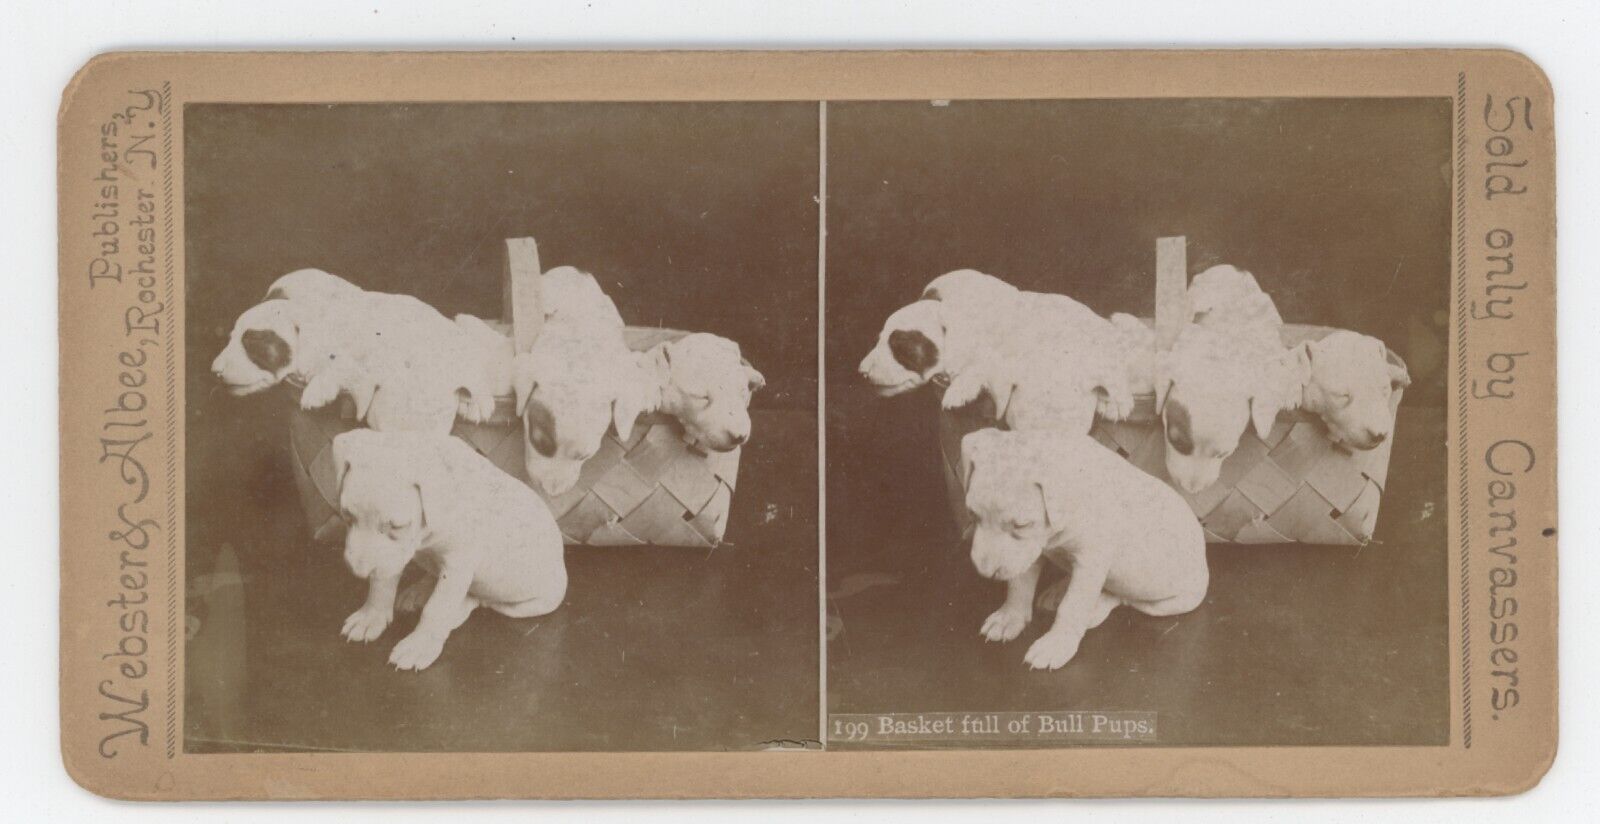 c1900's Real Photo Stereoview Basket Full of Bull Pups.  Bull Terrier Puppies